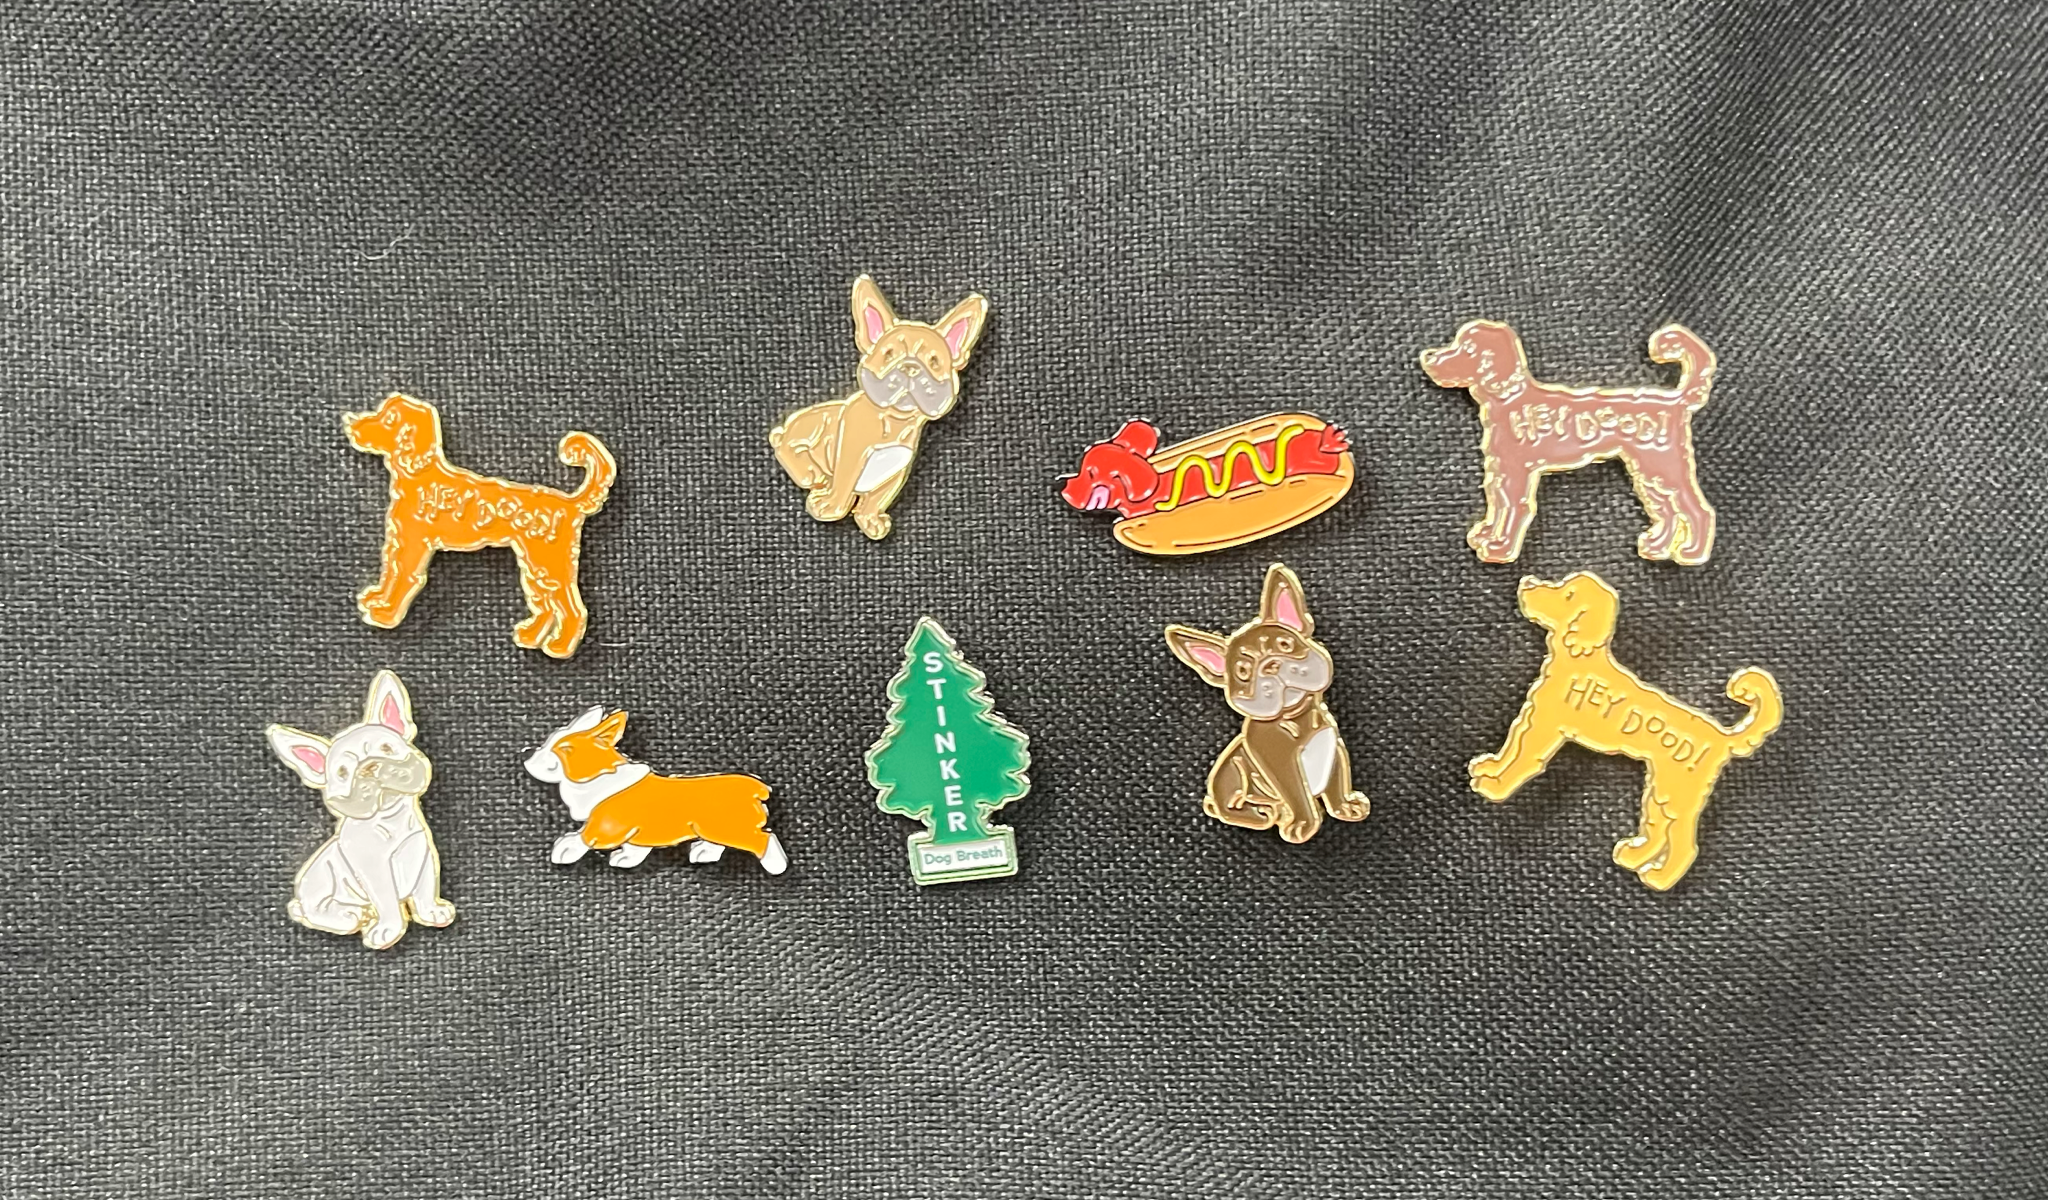 A group of dog related pins displayed on fabric